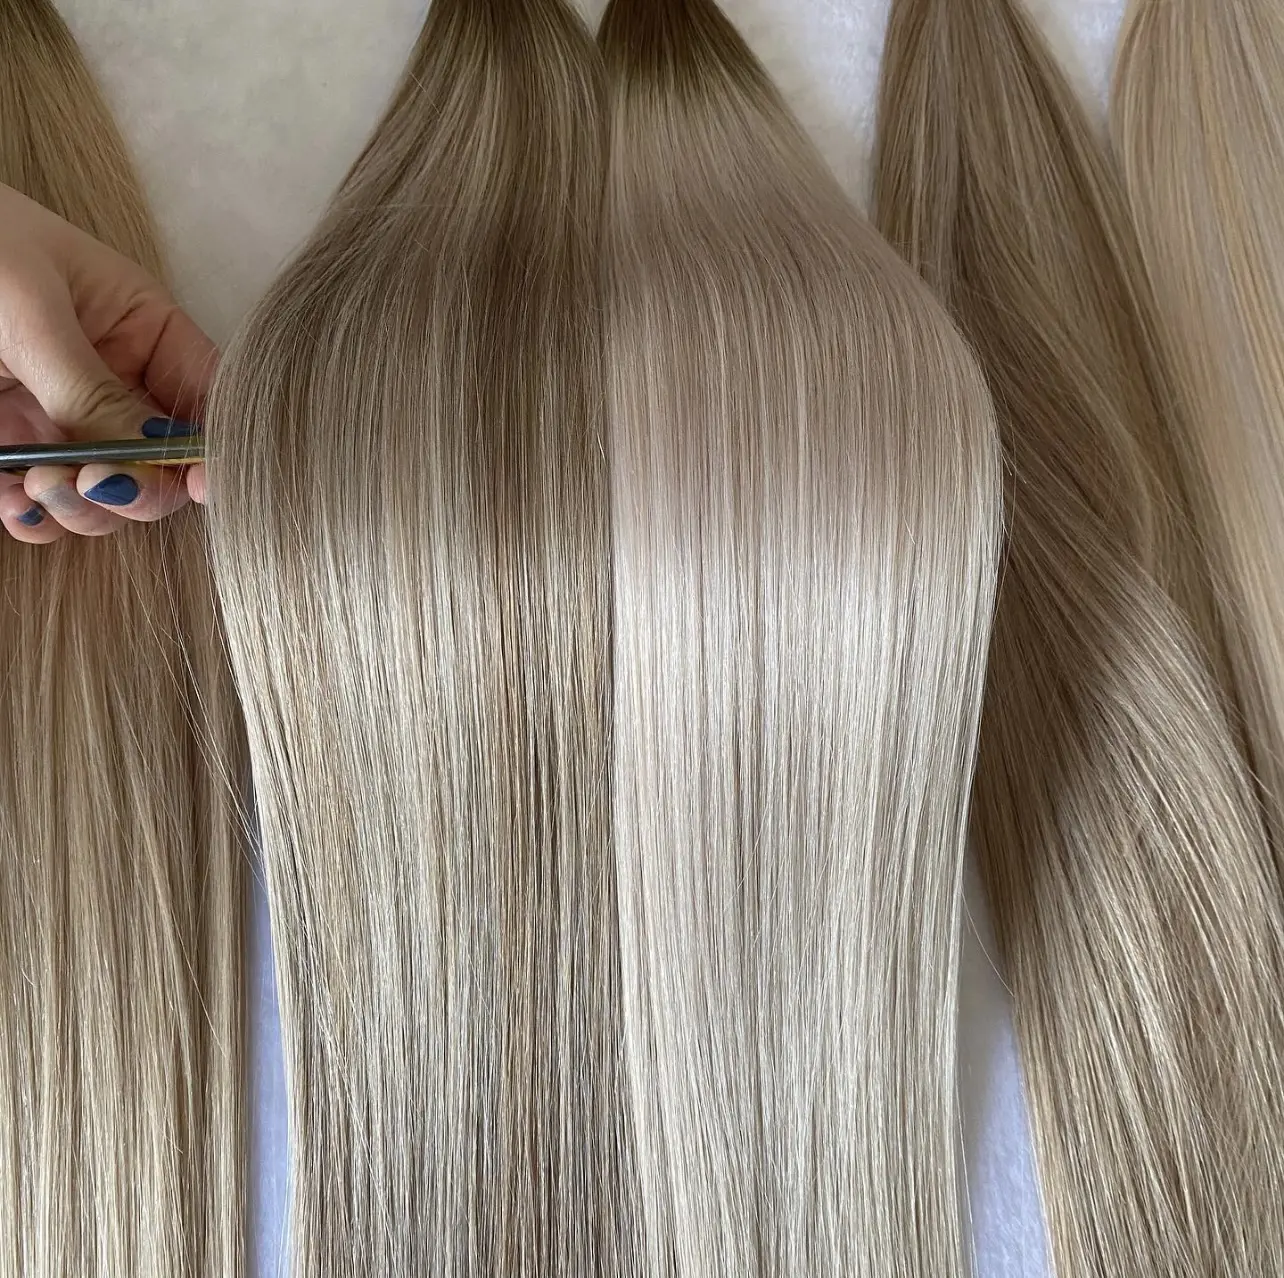 Added Volume Authentic Double Drawn Hand Tied Weft Ethically Sourced Natural Blonde Russian Virgin Human Hair Hair Extensions